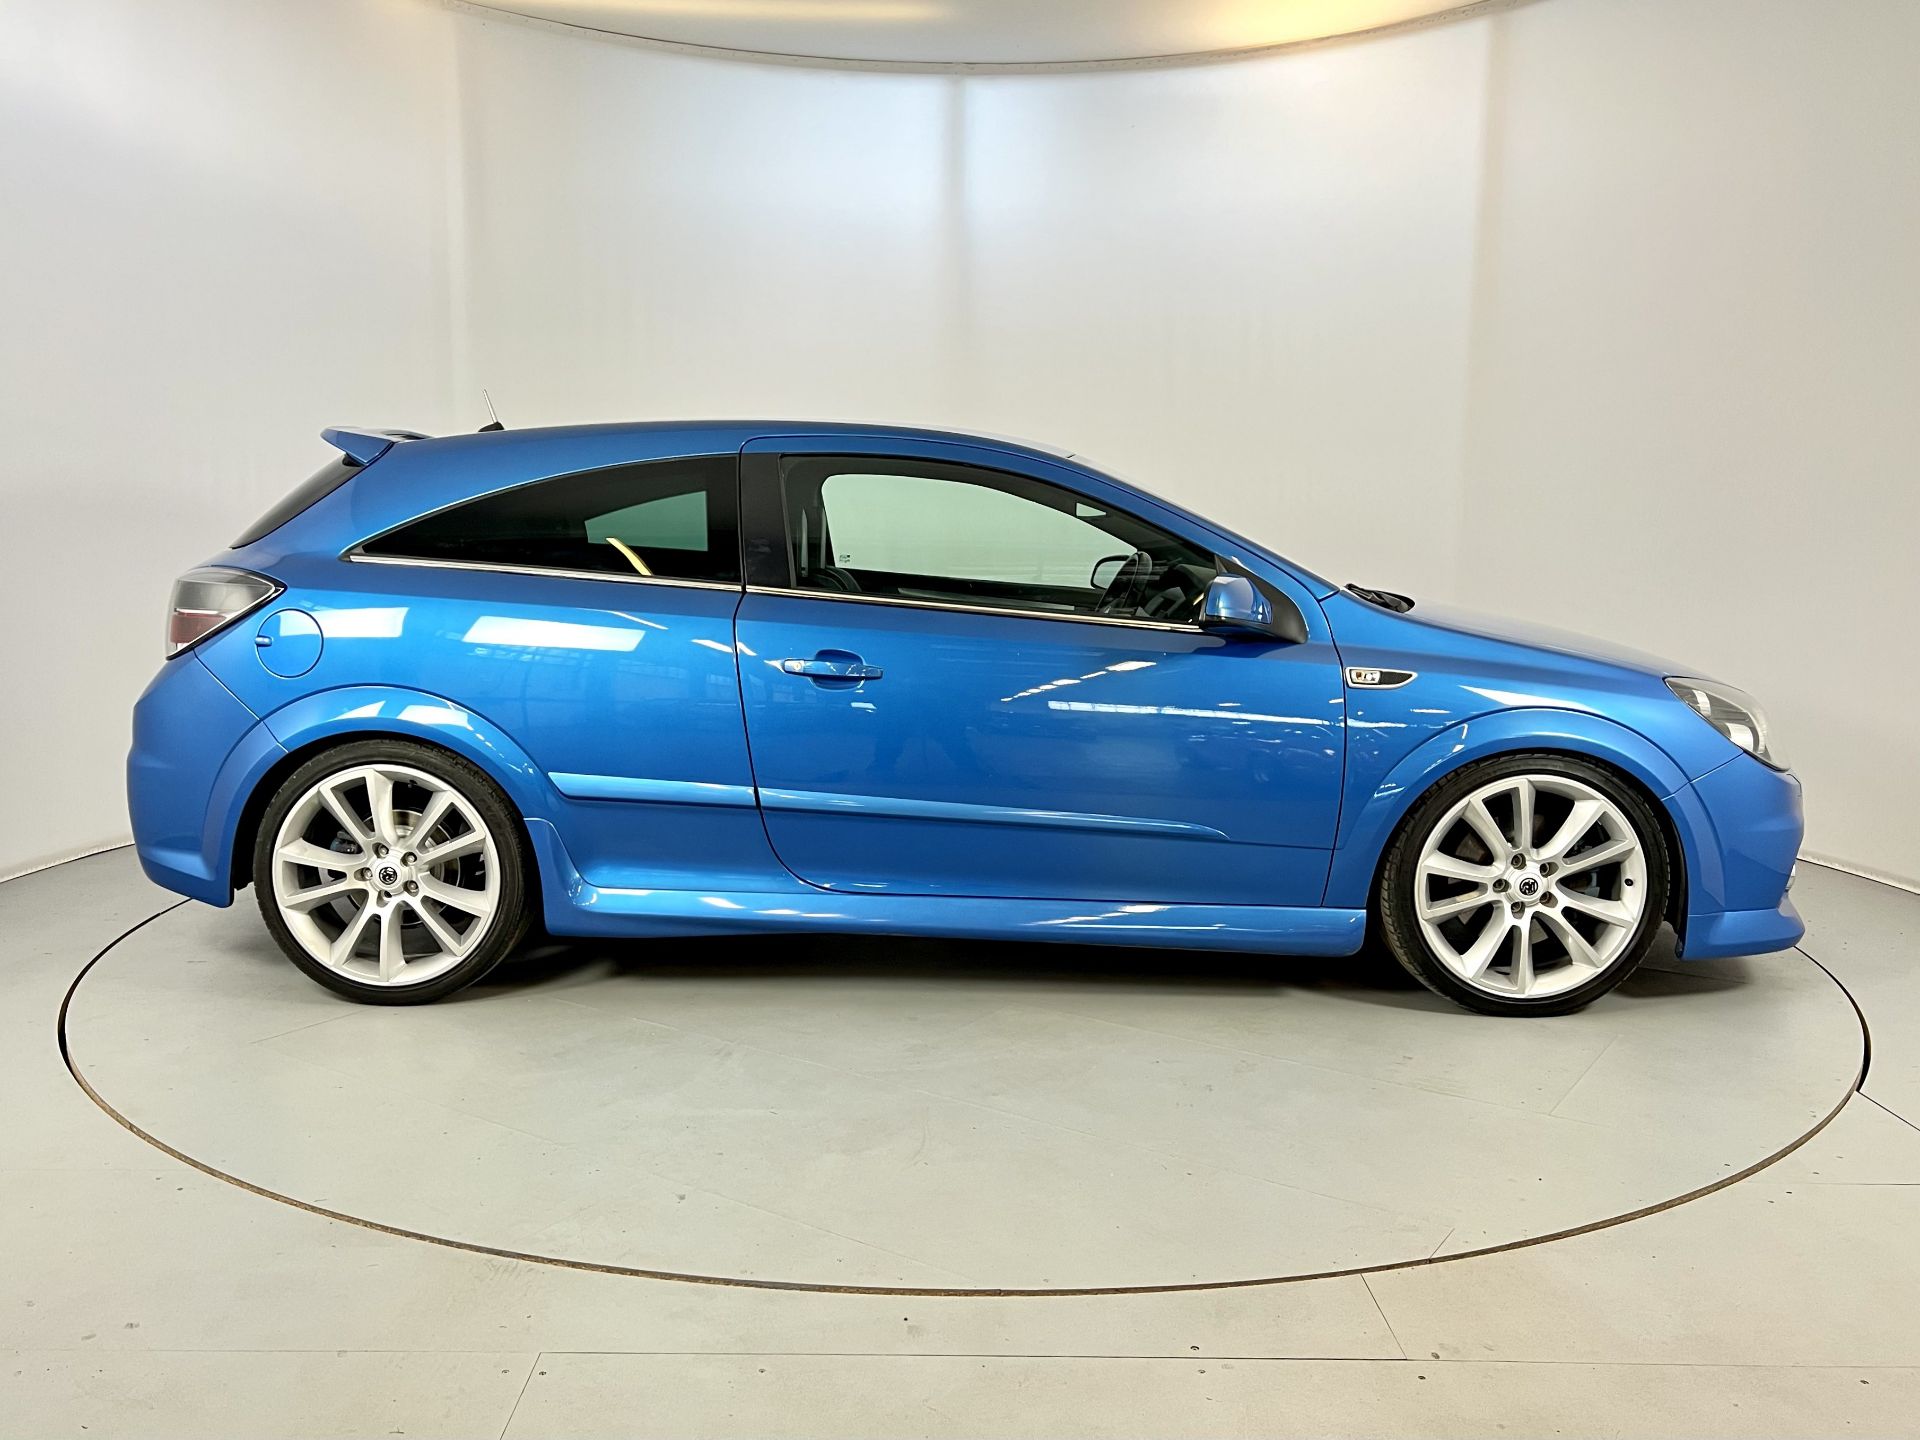 Vauxhall Astra VXR - Image 11 of 30